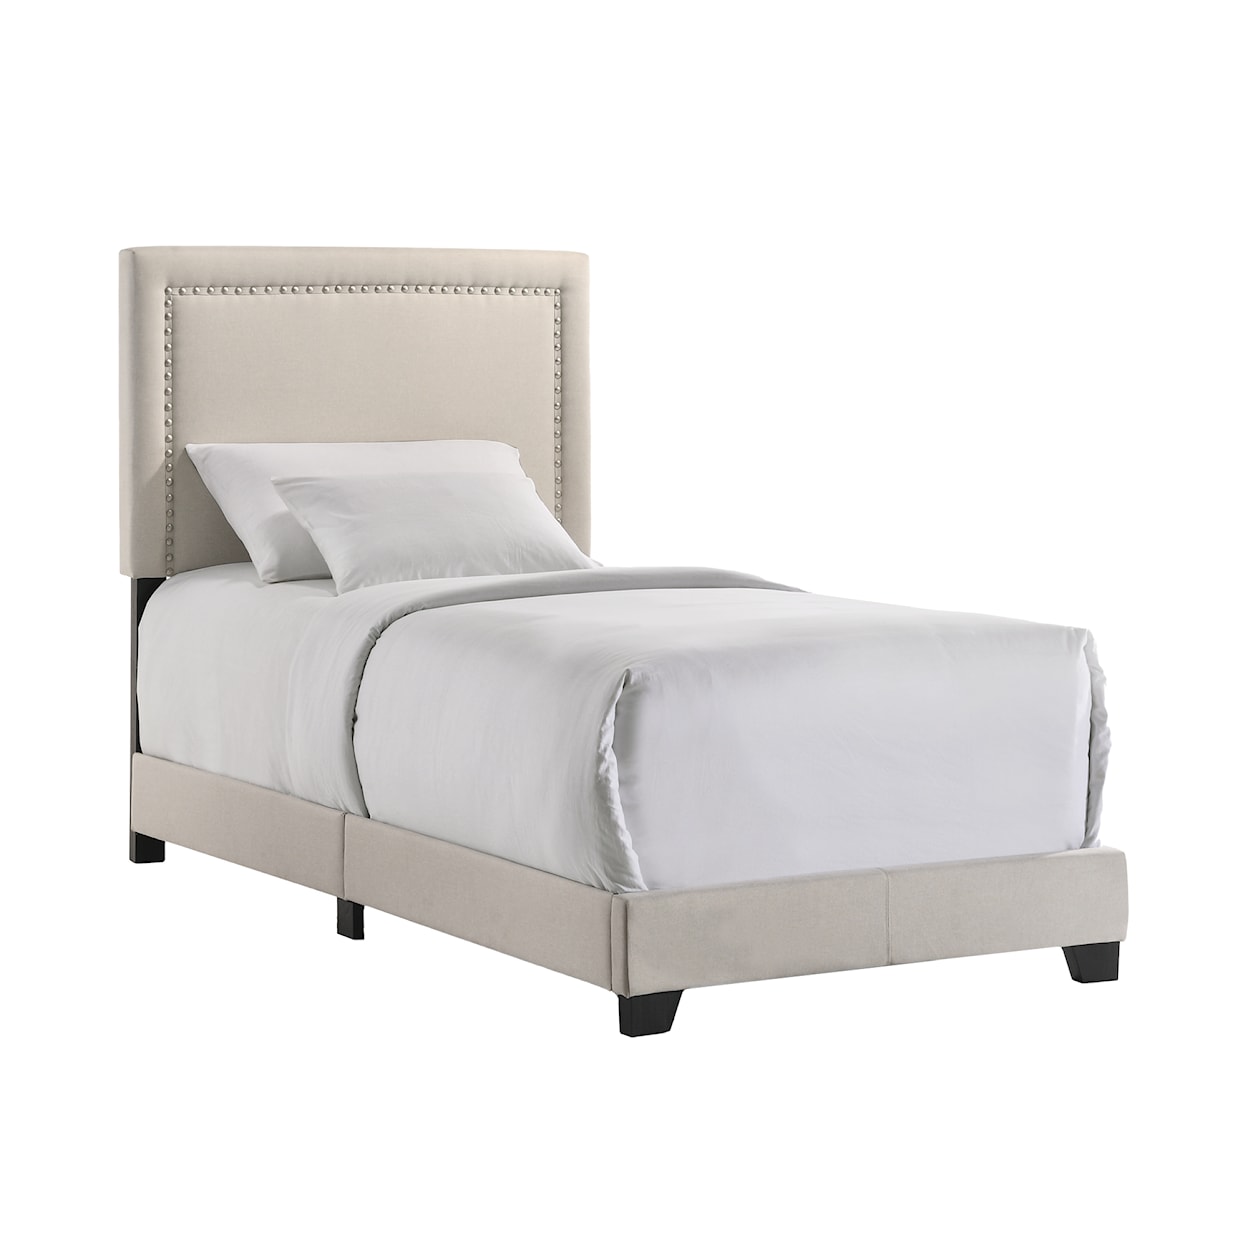 Intercon Upholstered Beds Zion Twin Upholstered Bed